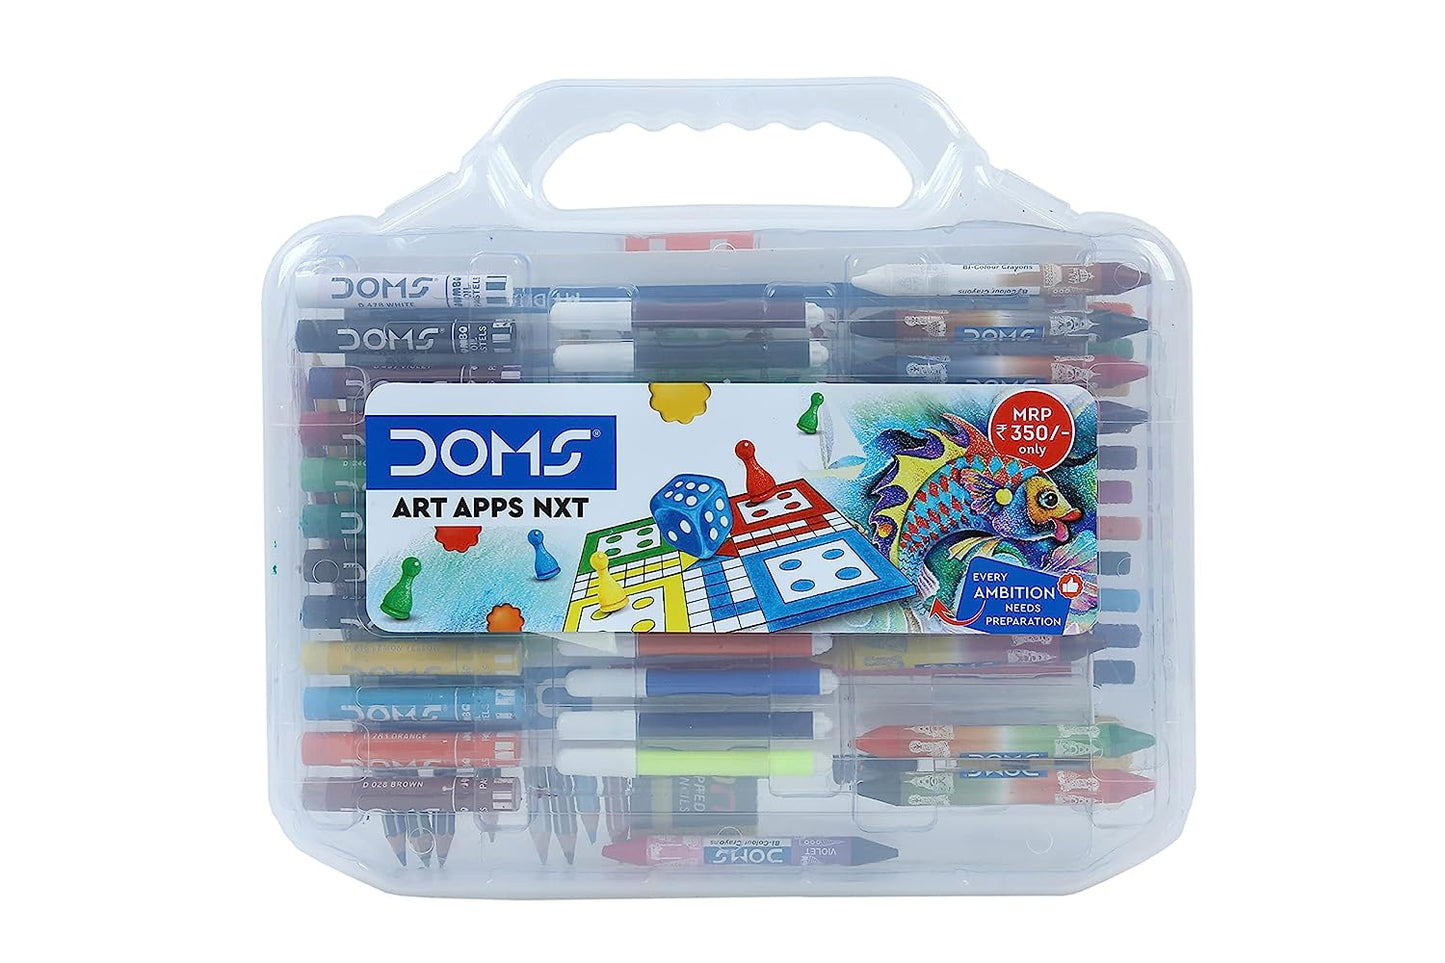 Doms Art Apps Nxt Kit With Plastic Carry Case | Kit For School Essentials | Gifting Range For Kids | Combination of 9 Stationery Items